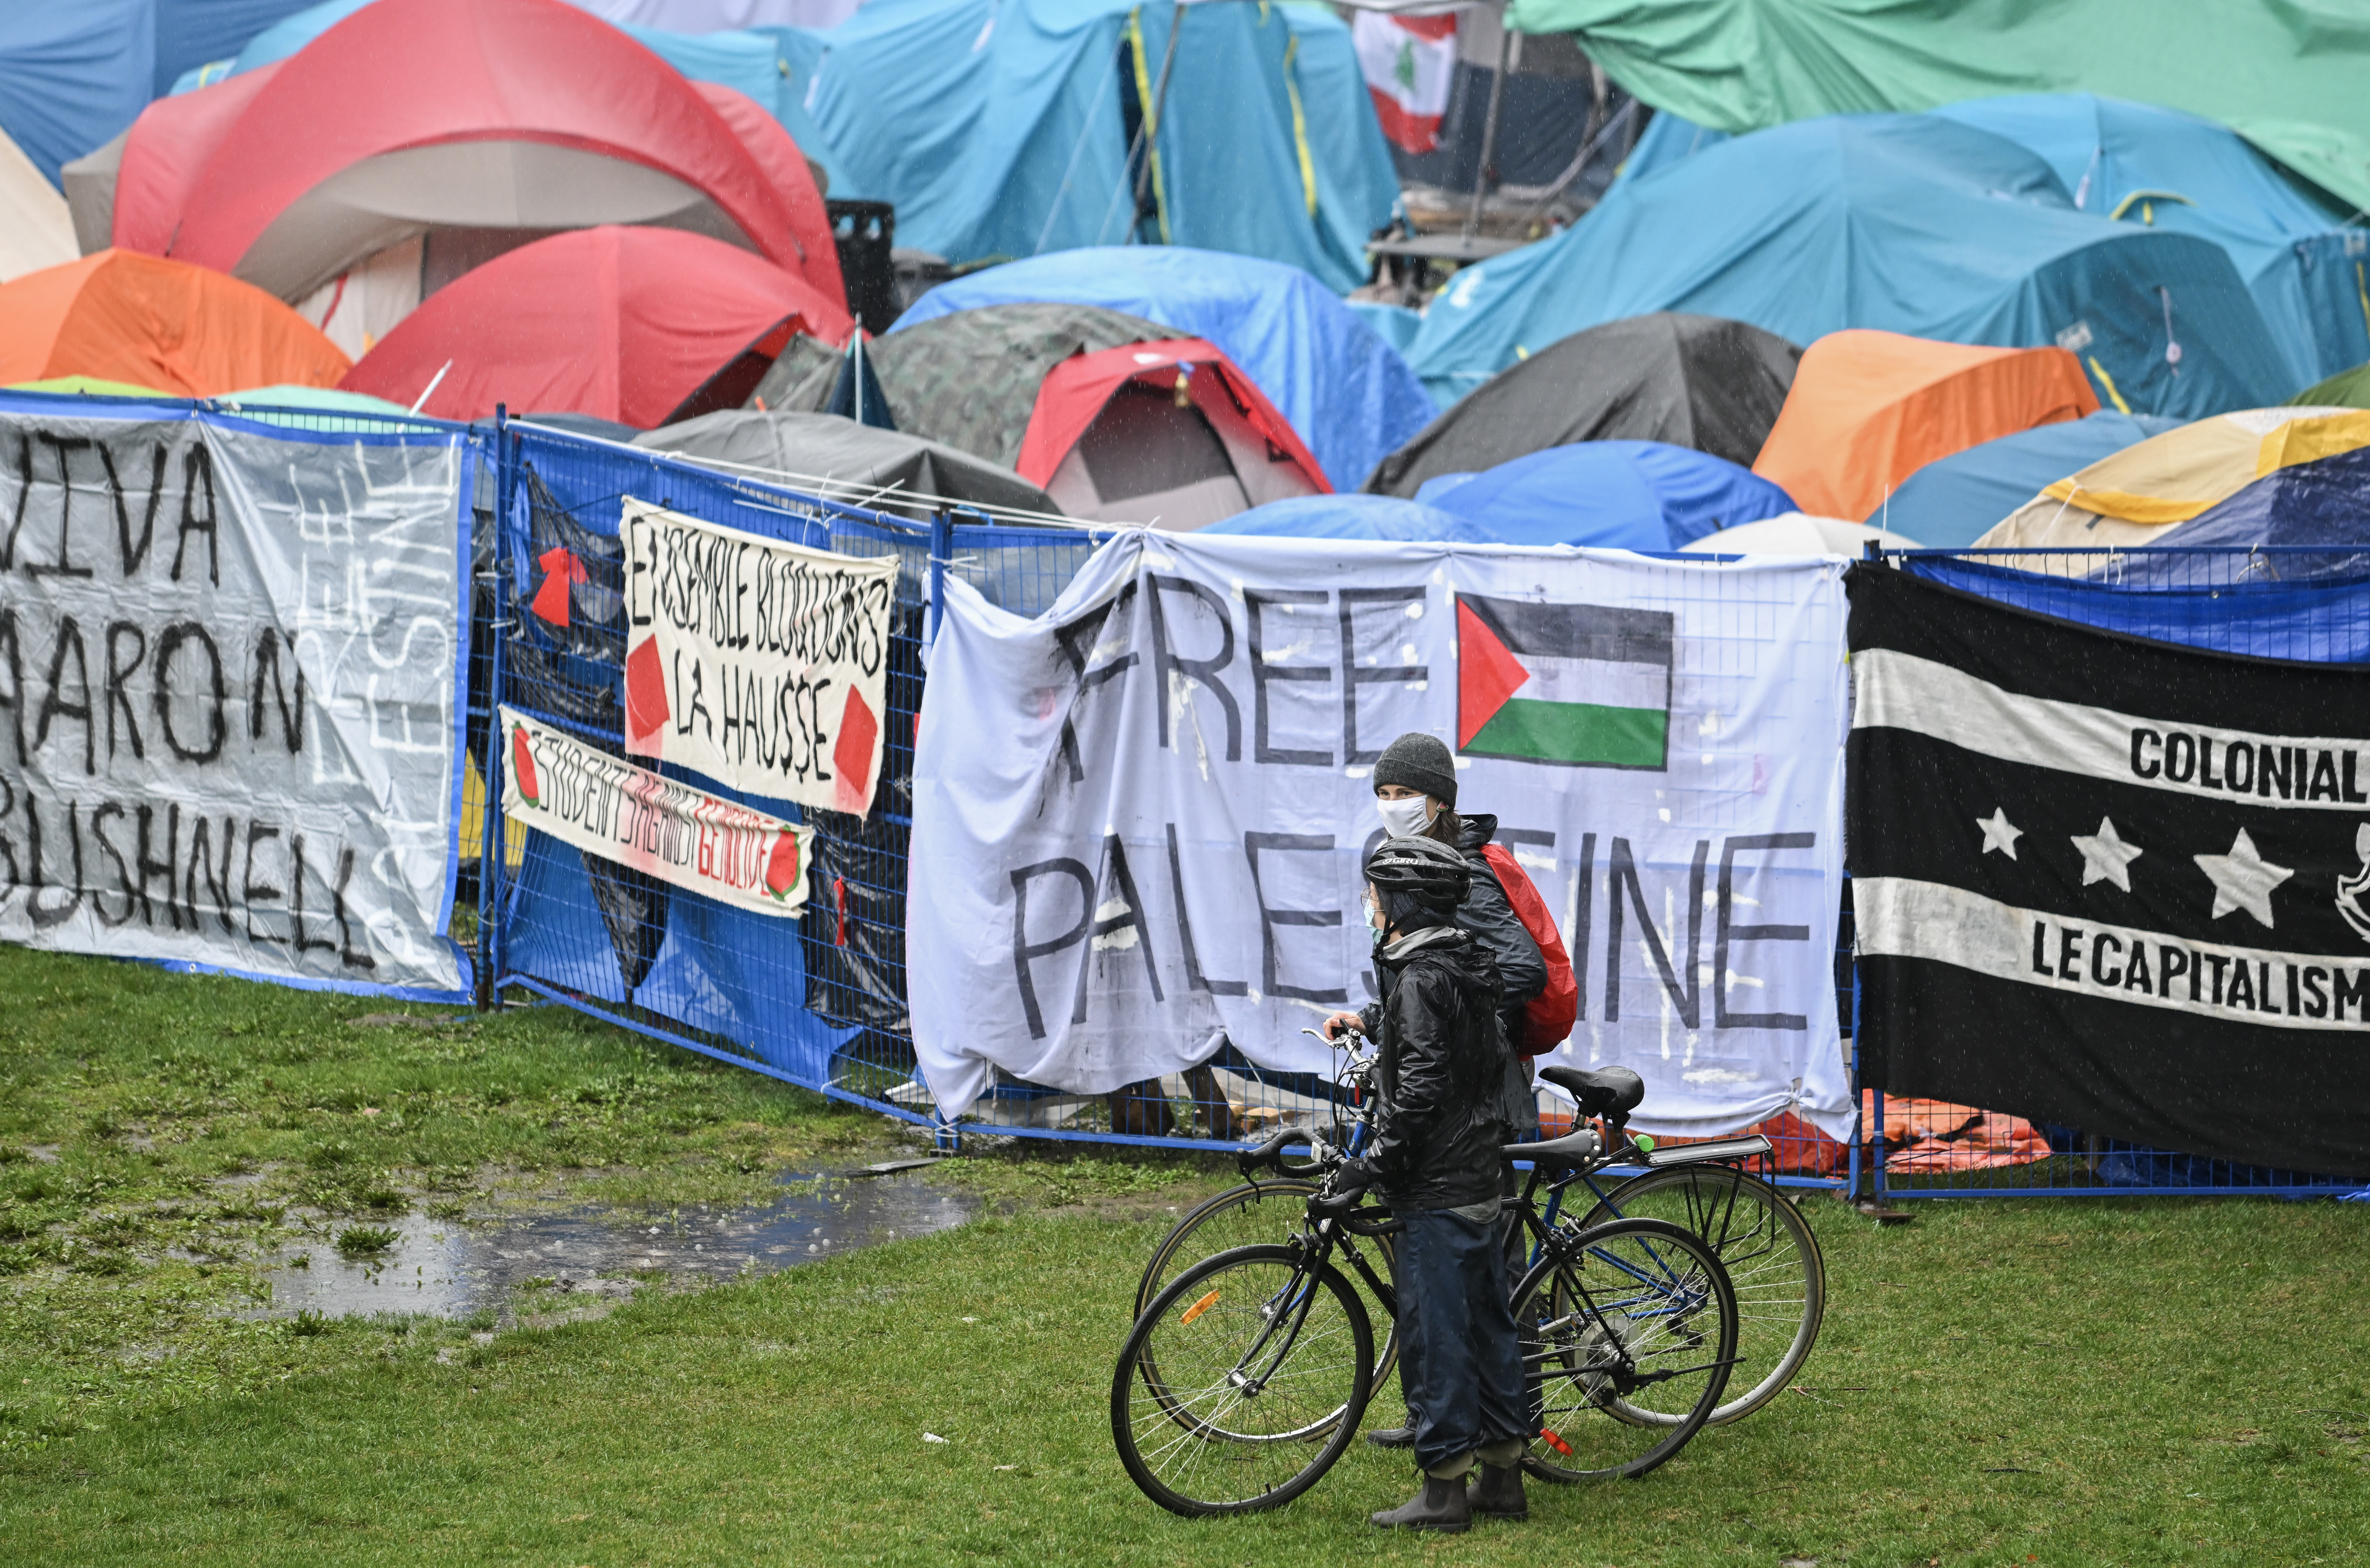 McGill heads to court for injunction to remove pro-Palestinian encampment